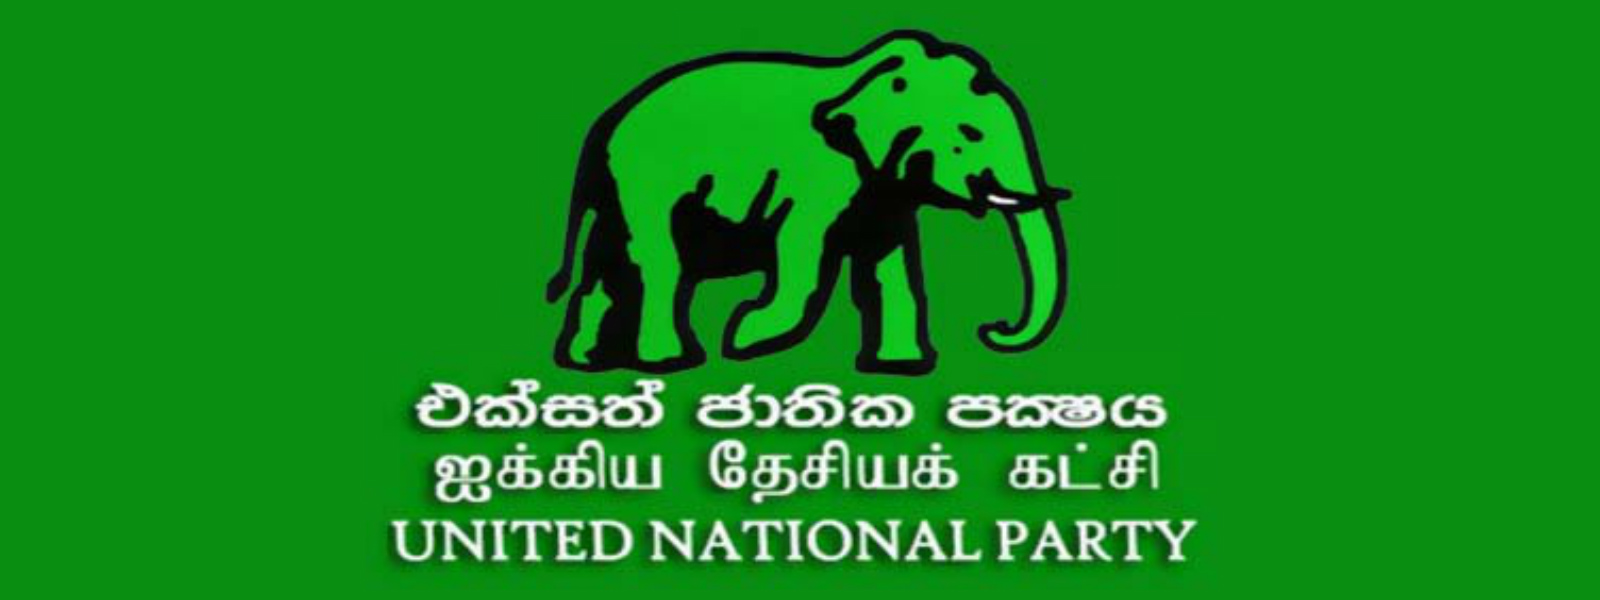 Proposal to elect office bearers of the UNP 